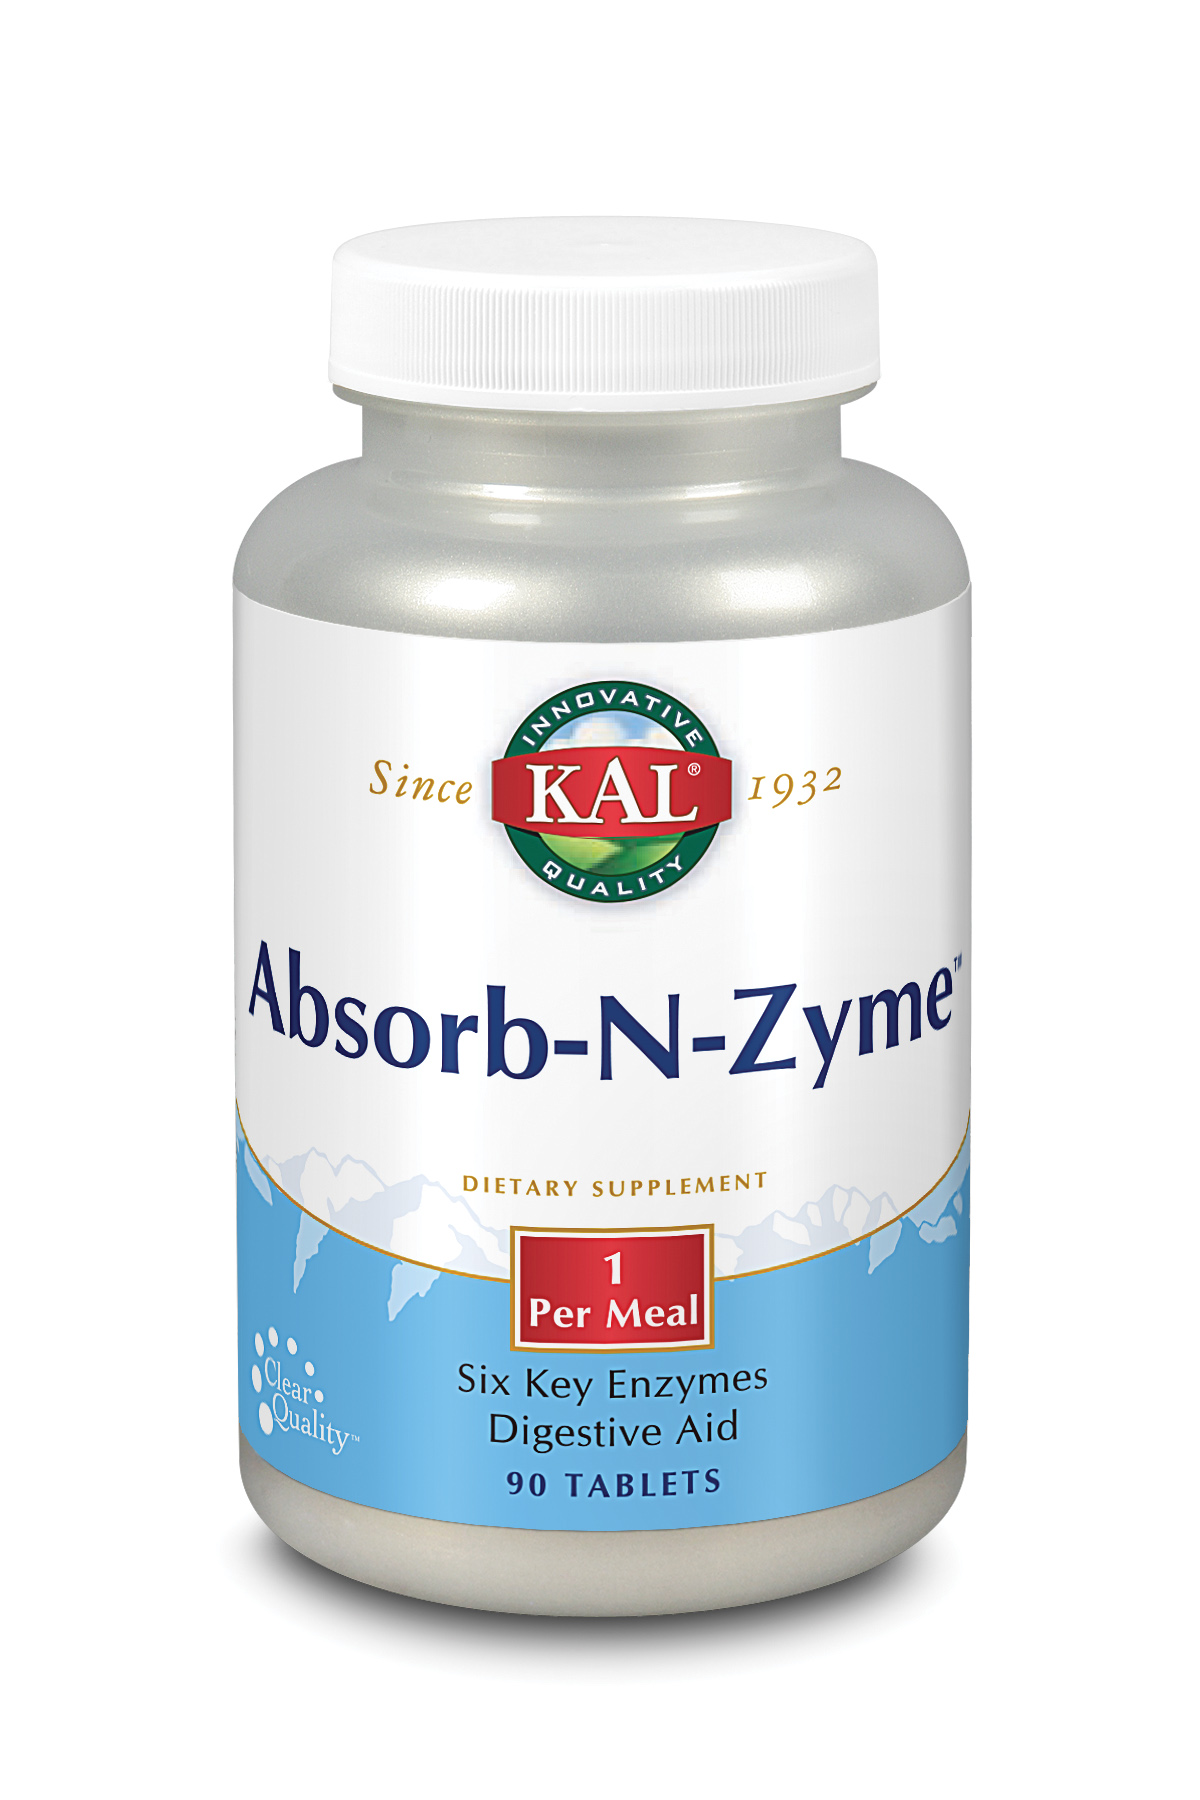 1649792480_ABSORB-N-ZYME-10556